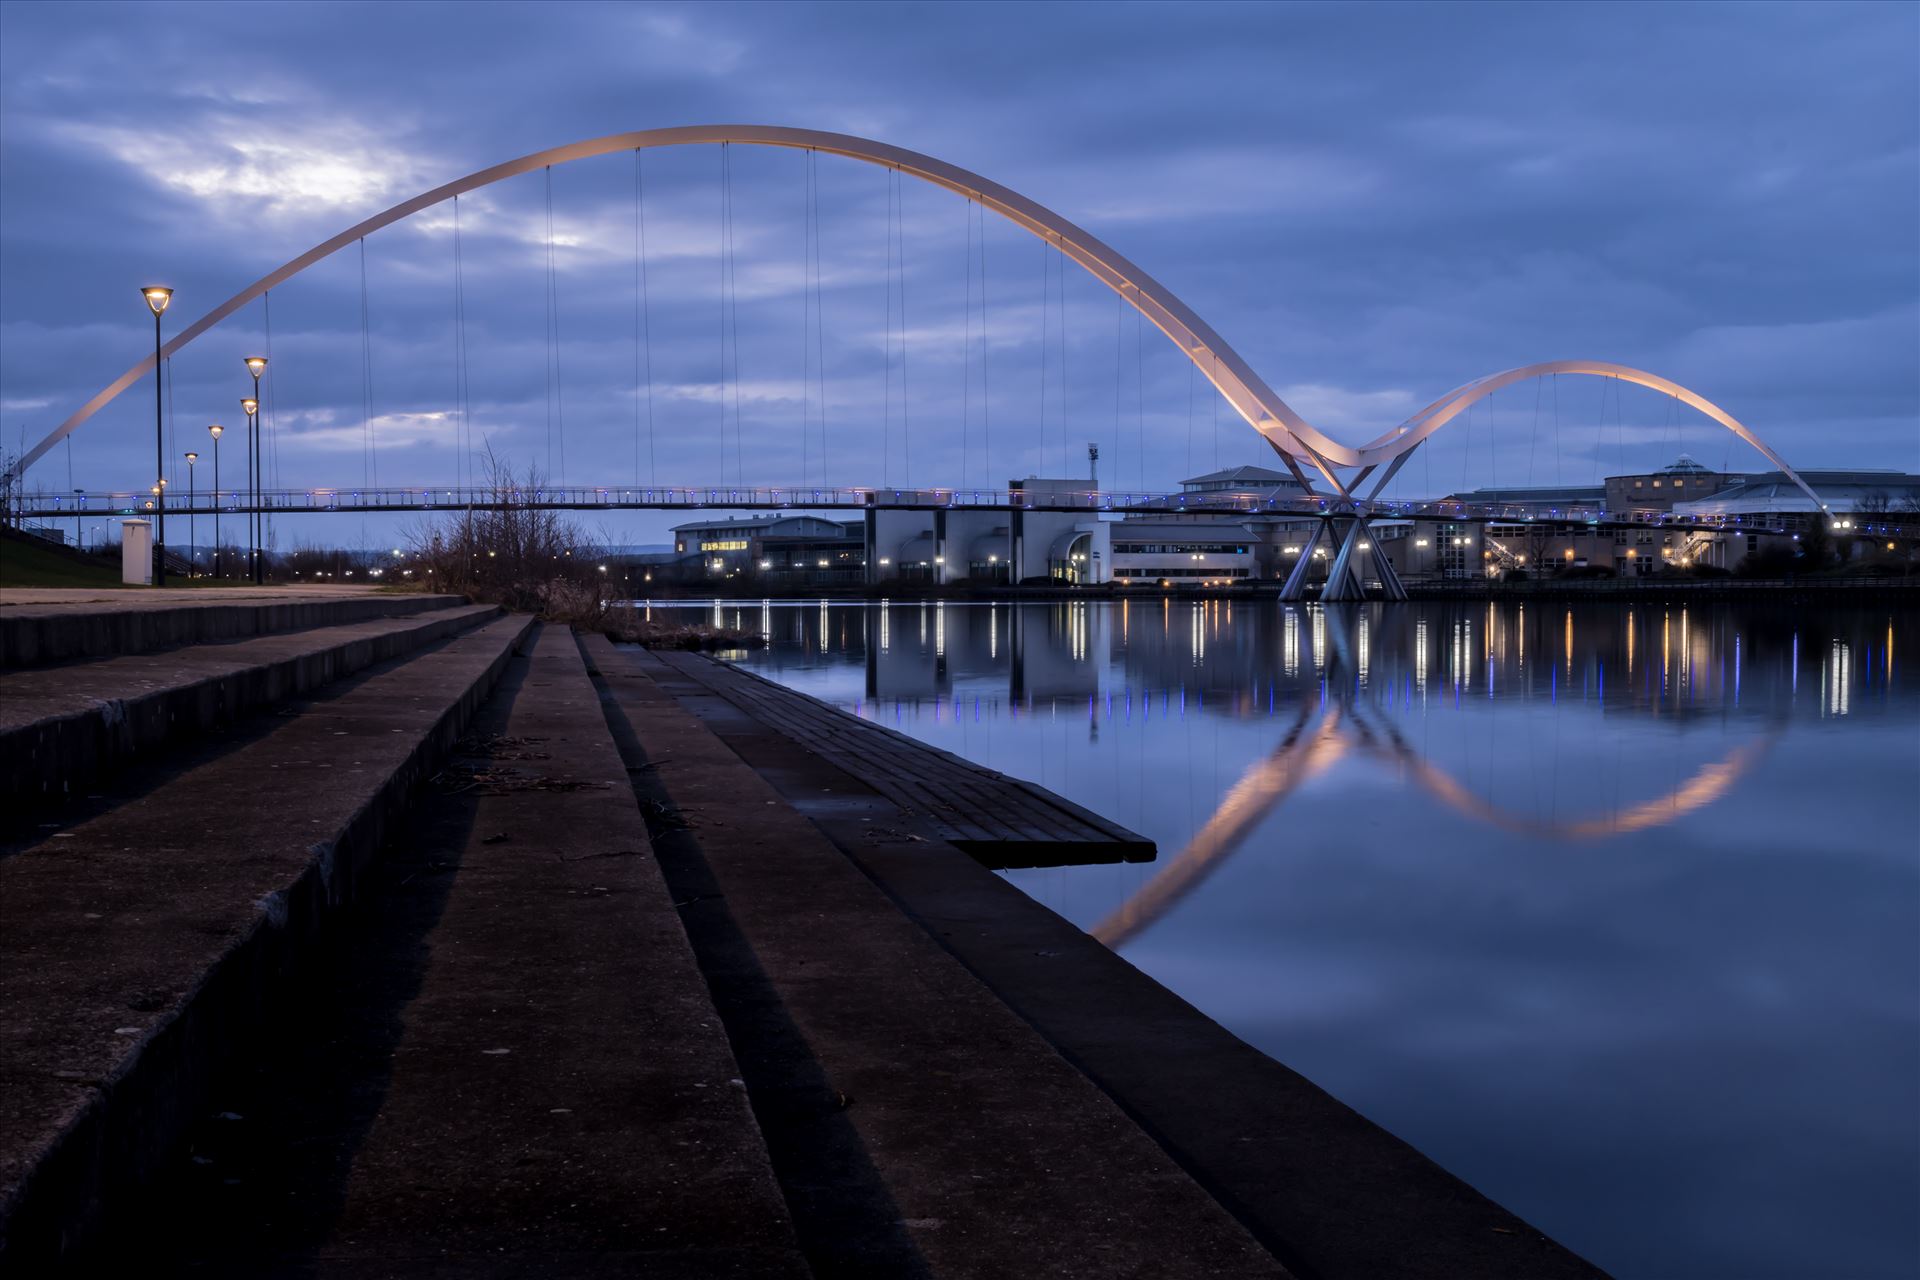 The Infinity Bridge 03 - The Infinity Bridge is a public pedestrian and cycle footbridge across the River Tees that was officially opened on 14 May 2009 at a cost of £15 million. by philreay